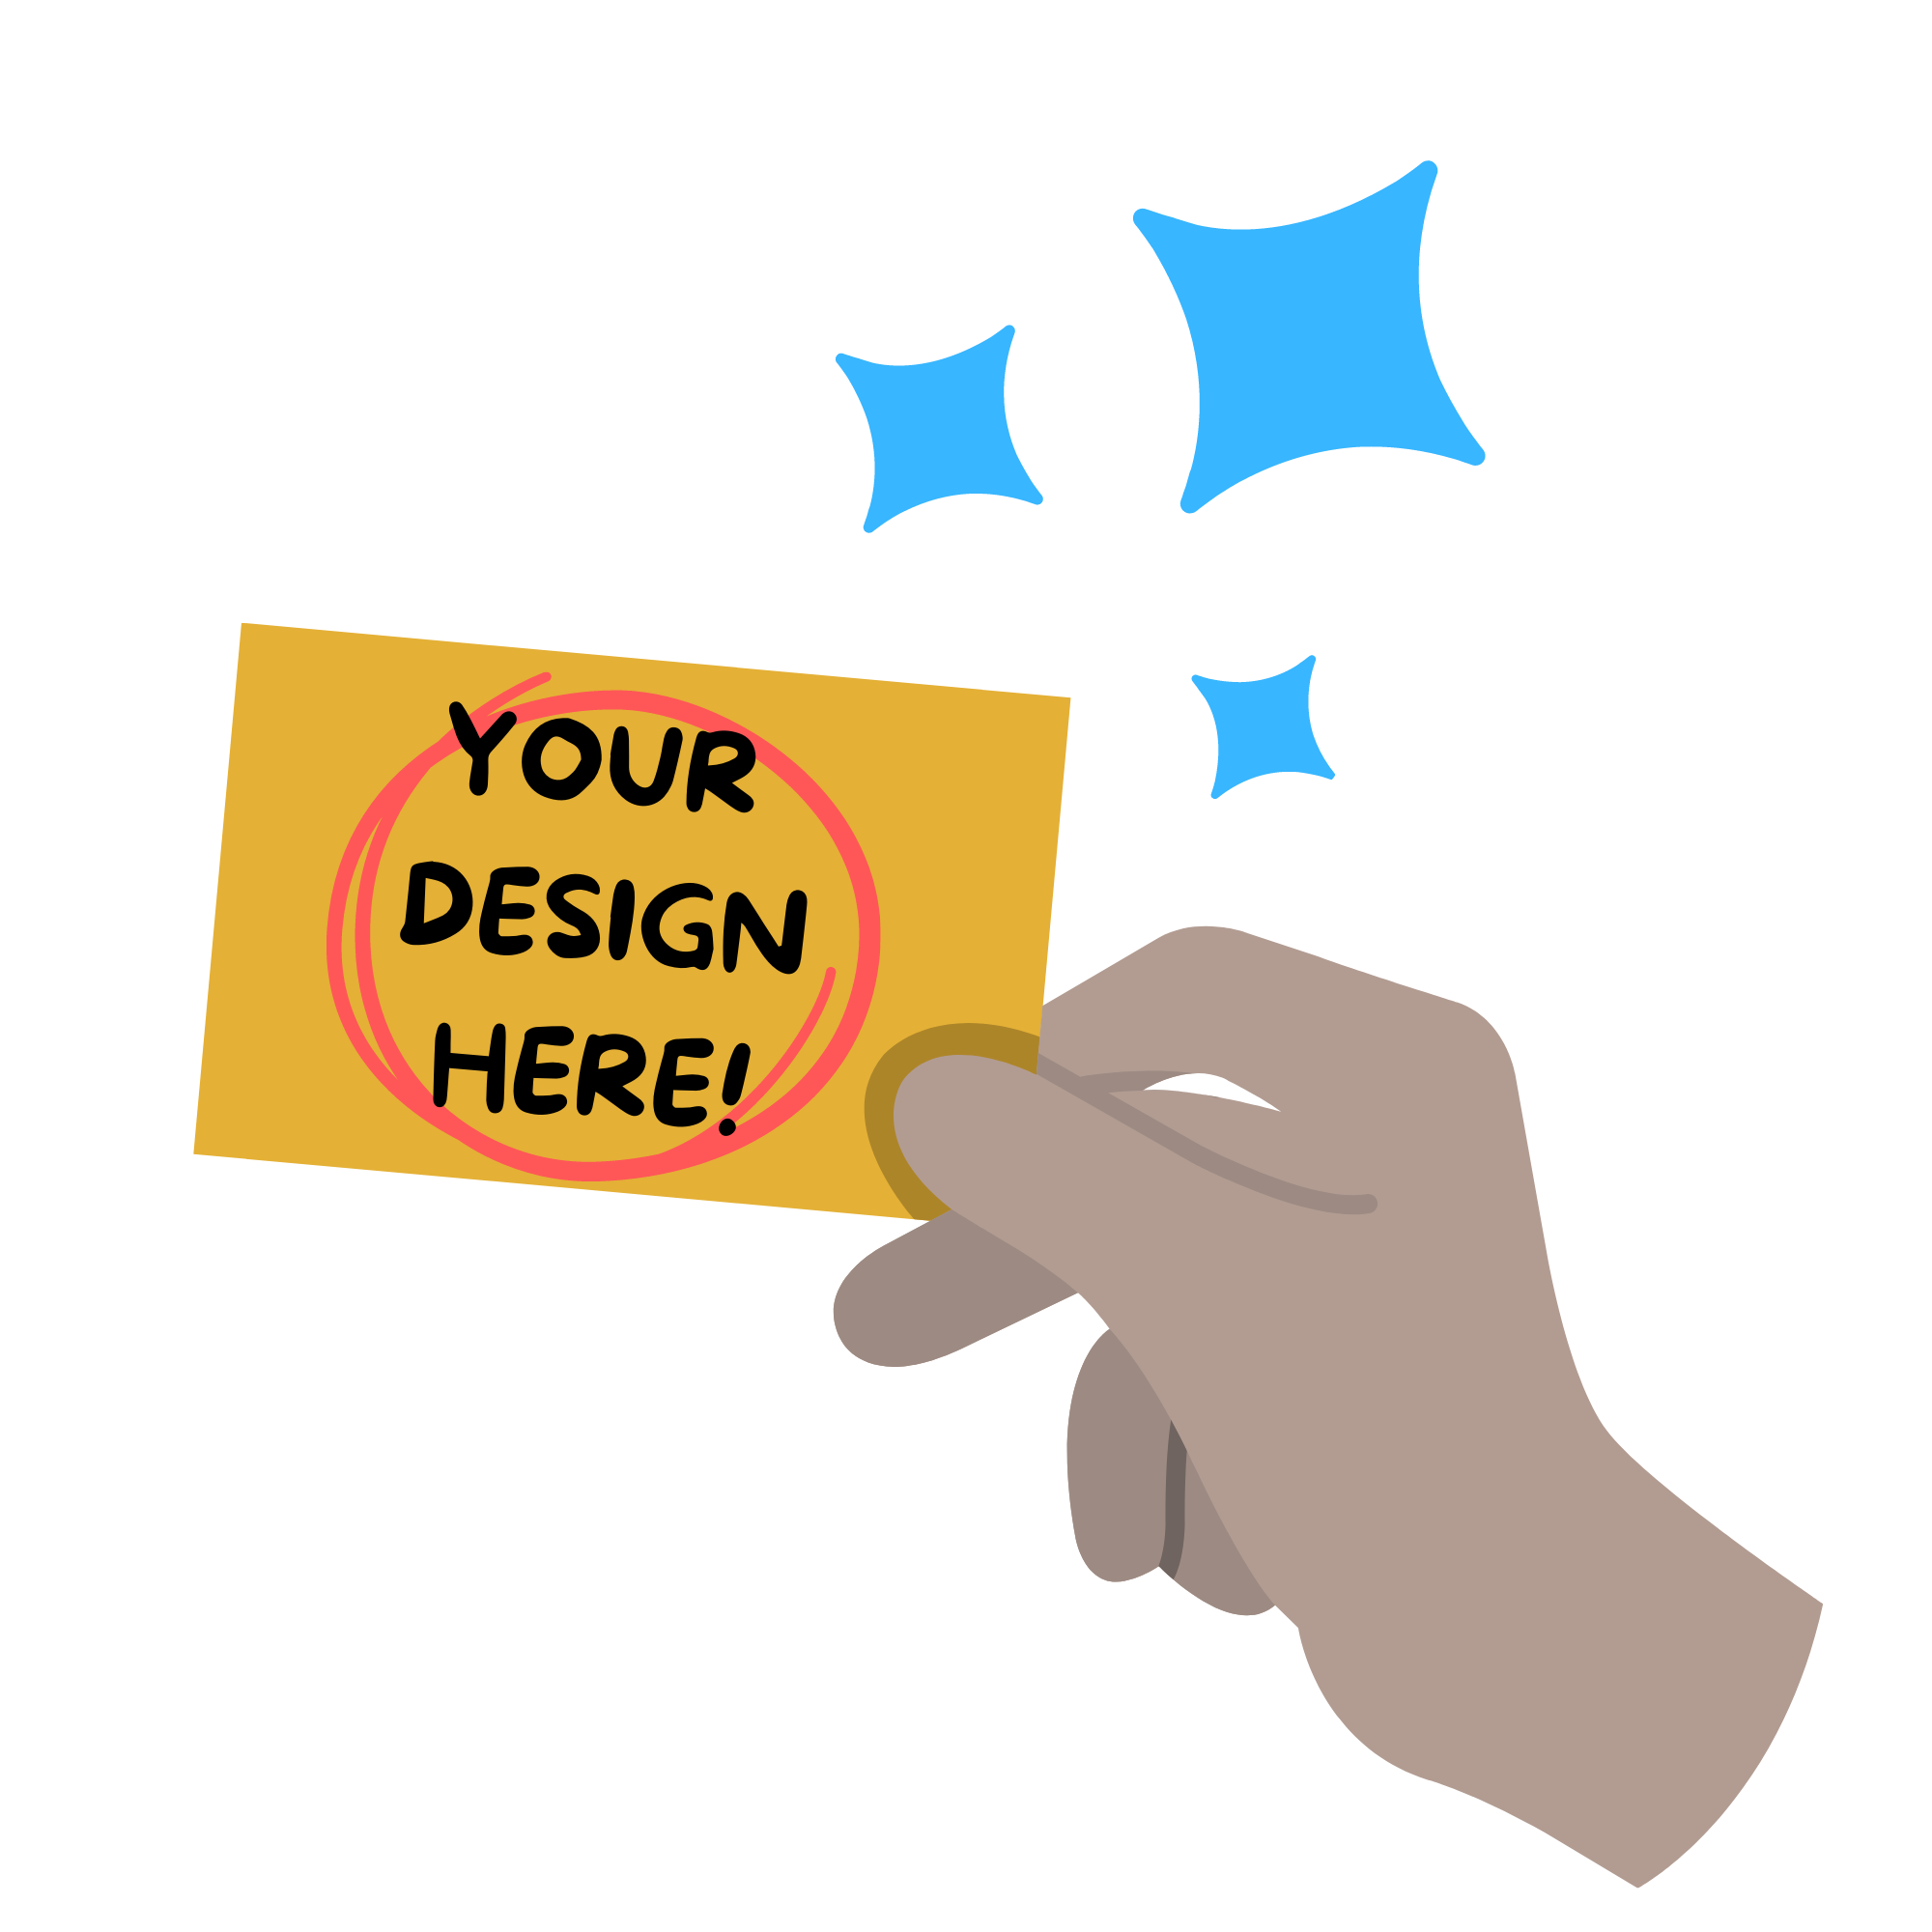 Can you design our new library cards?